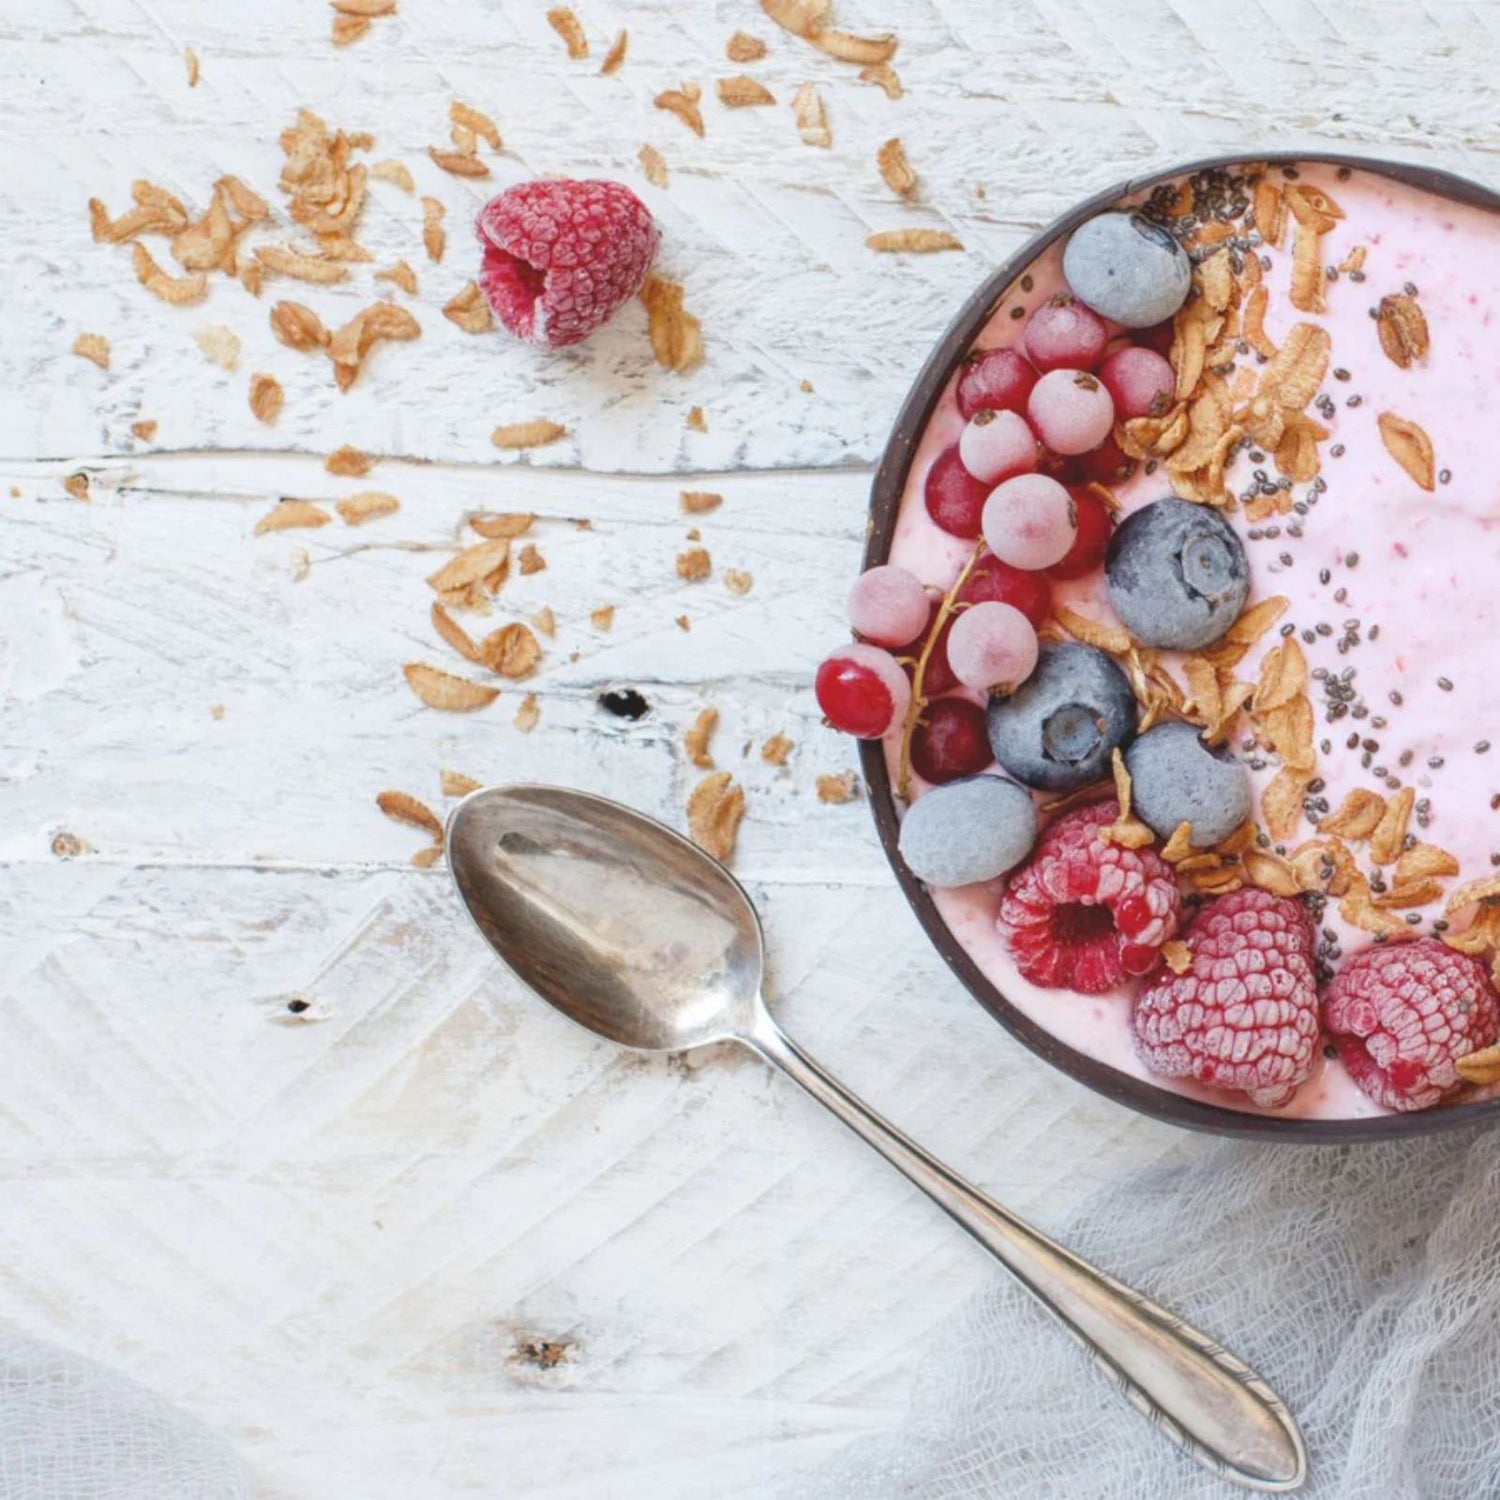 Organic smoothie bowl with healthy ingredients